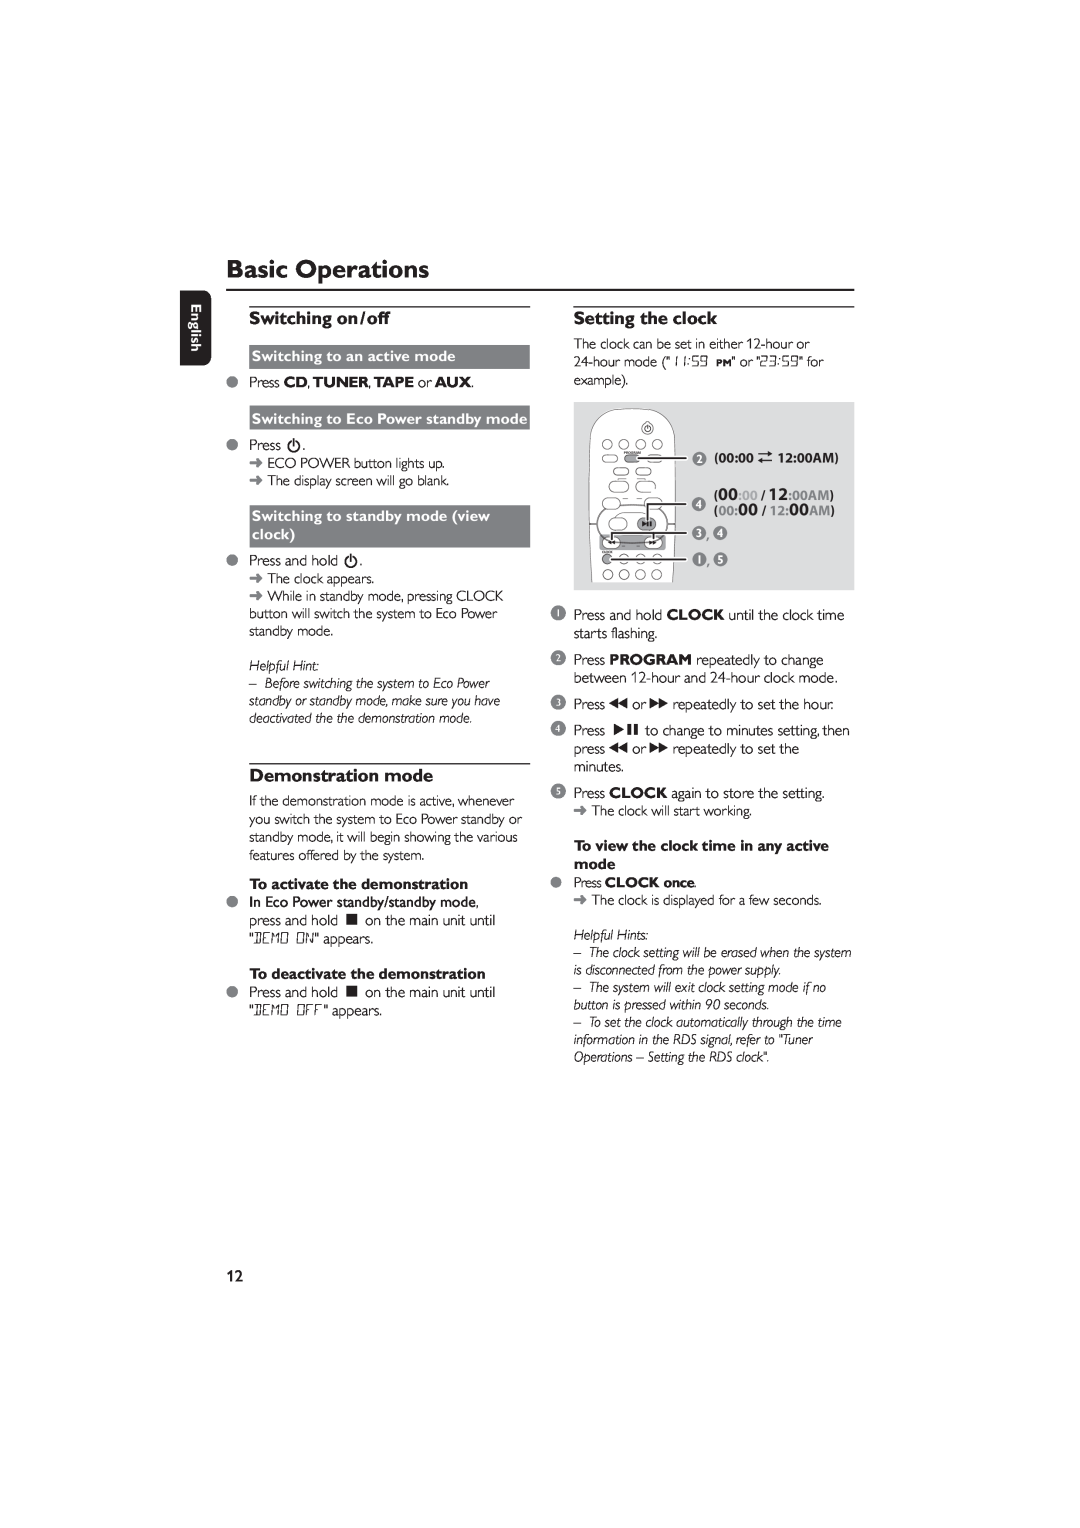 Philips MCM5 user manual Basic Operations, Switching on/off, Demonstration mode, Setting the clock, English, Helpful Hint 